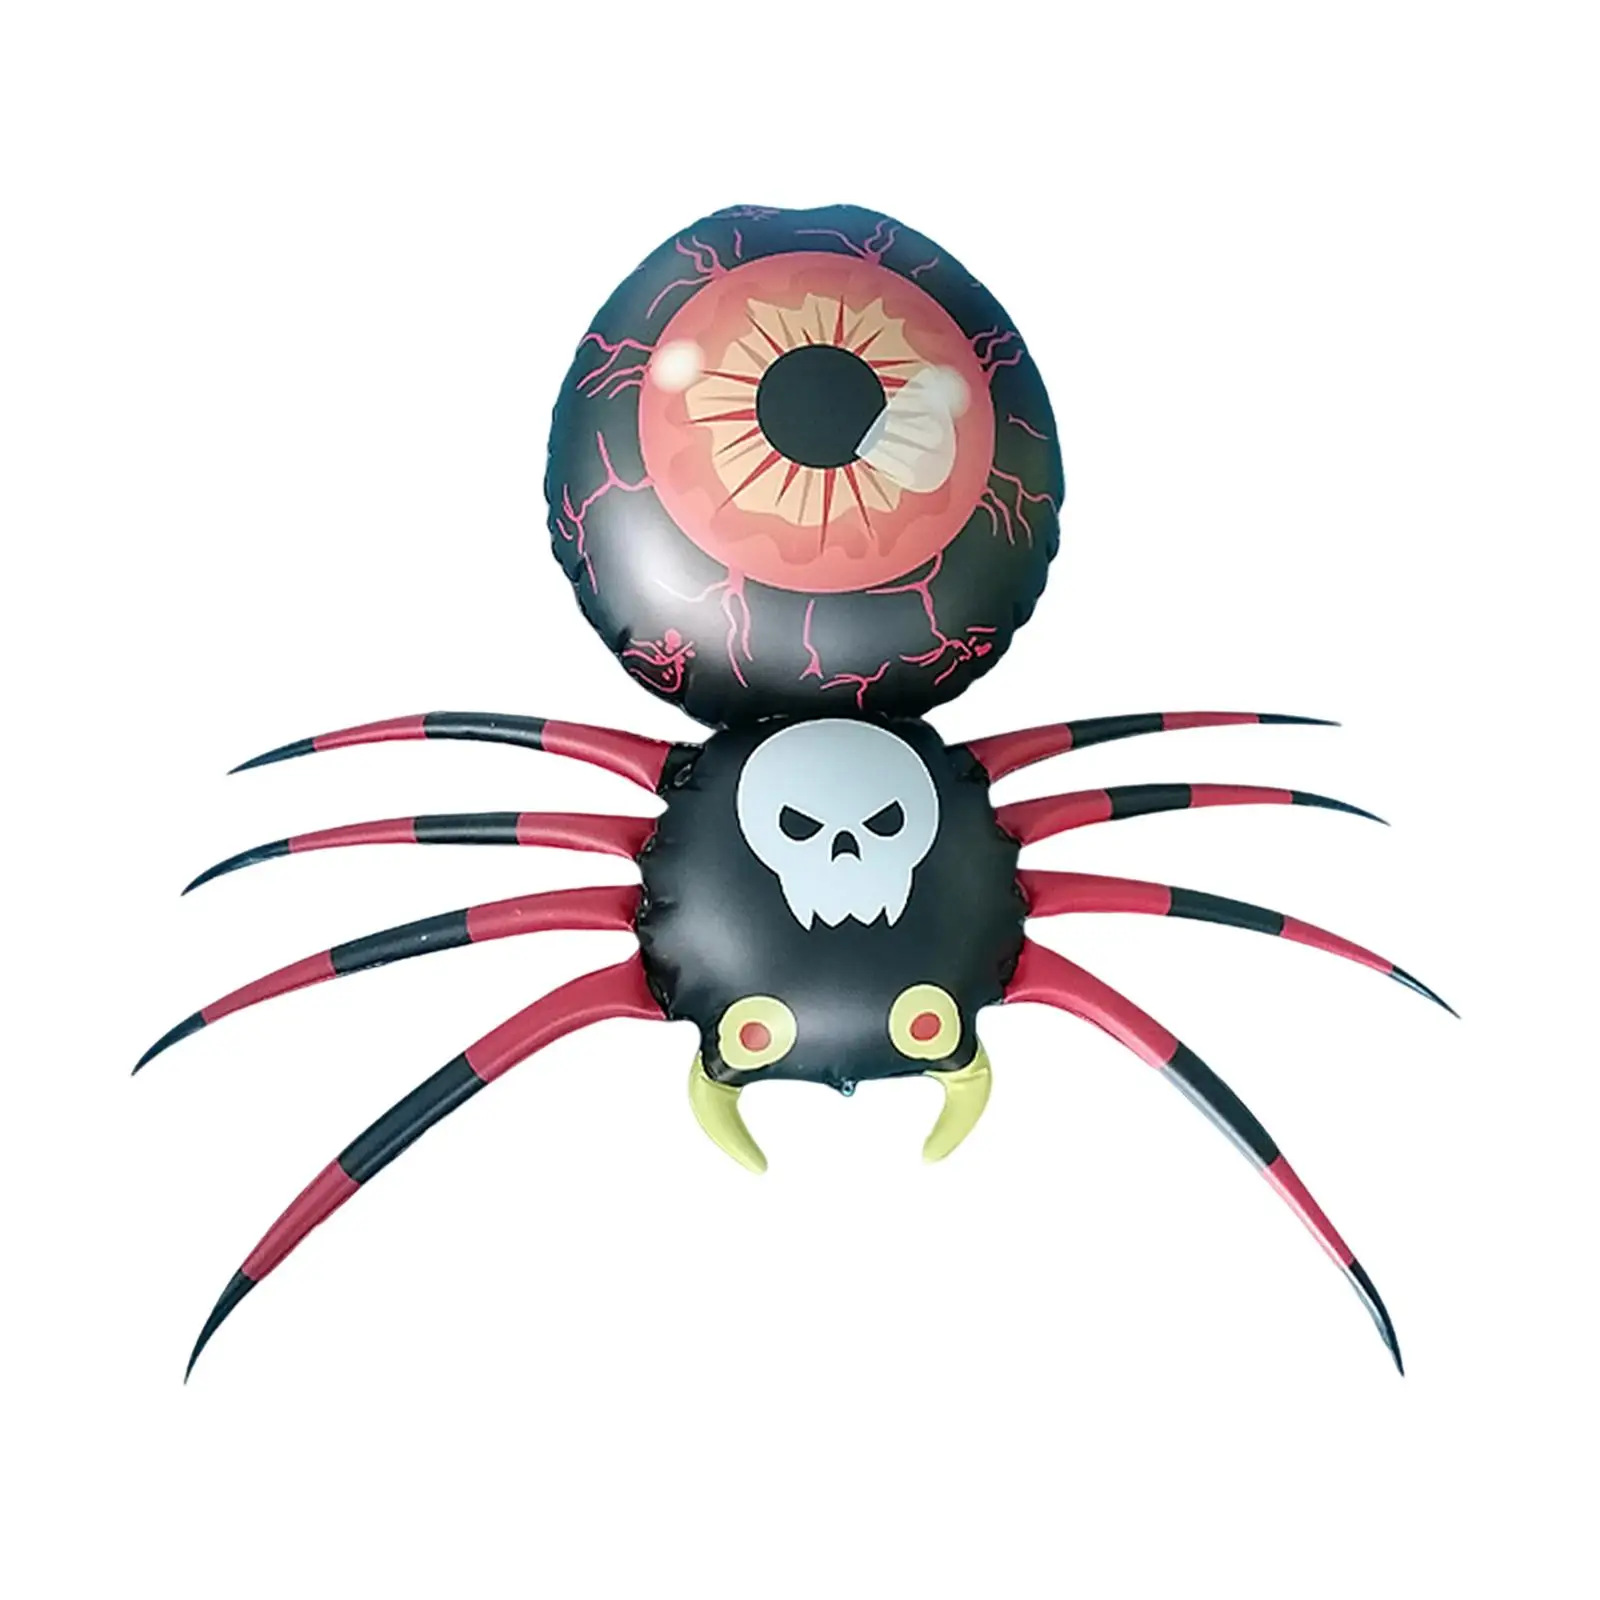 Halloween Inflatable Spider 110x105cm Fancy Dress Party Accessories Lighted Lawn Ornament for Yard Outdoor Party Holiday Patio